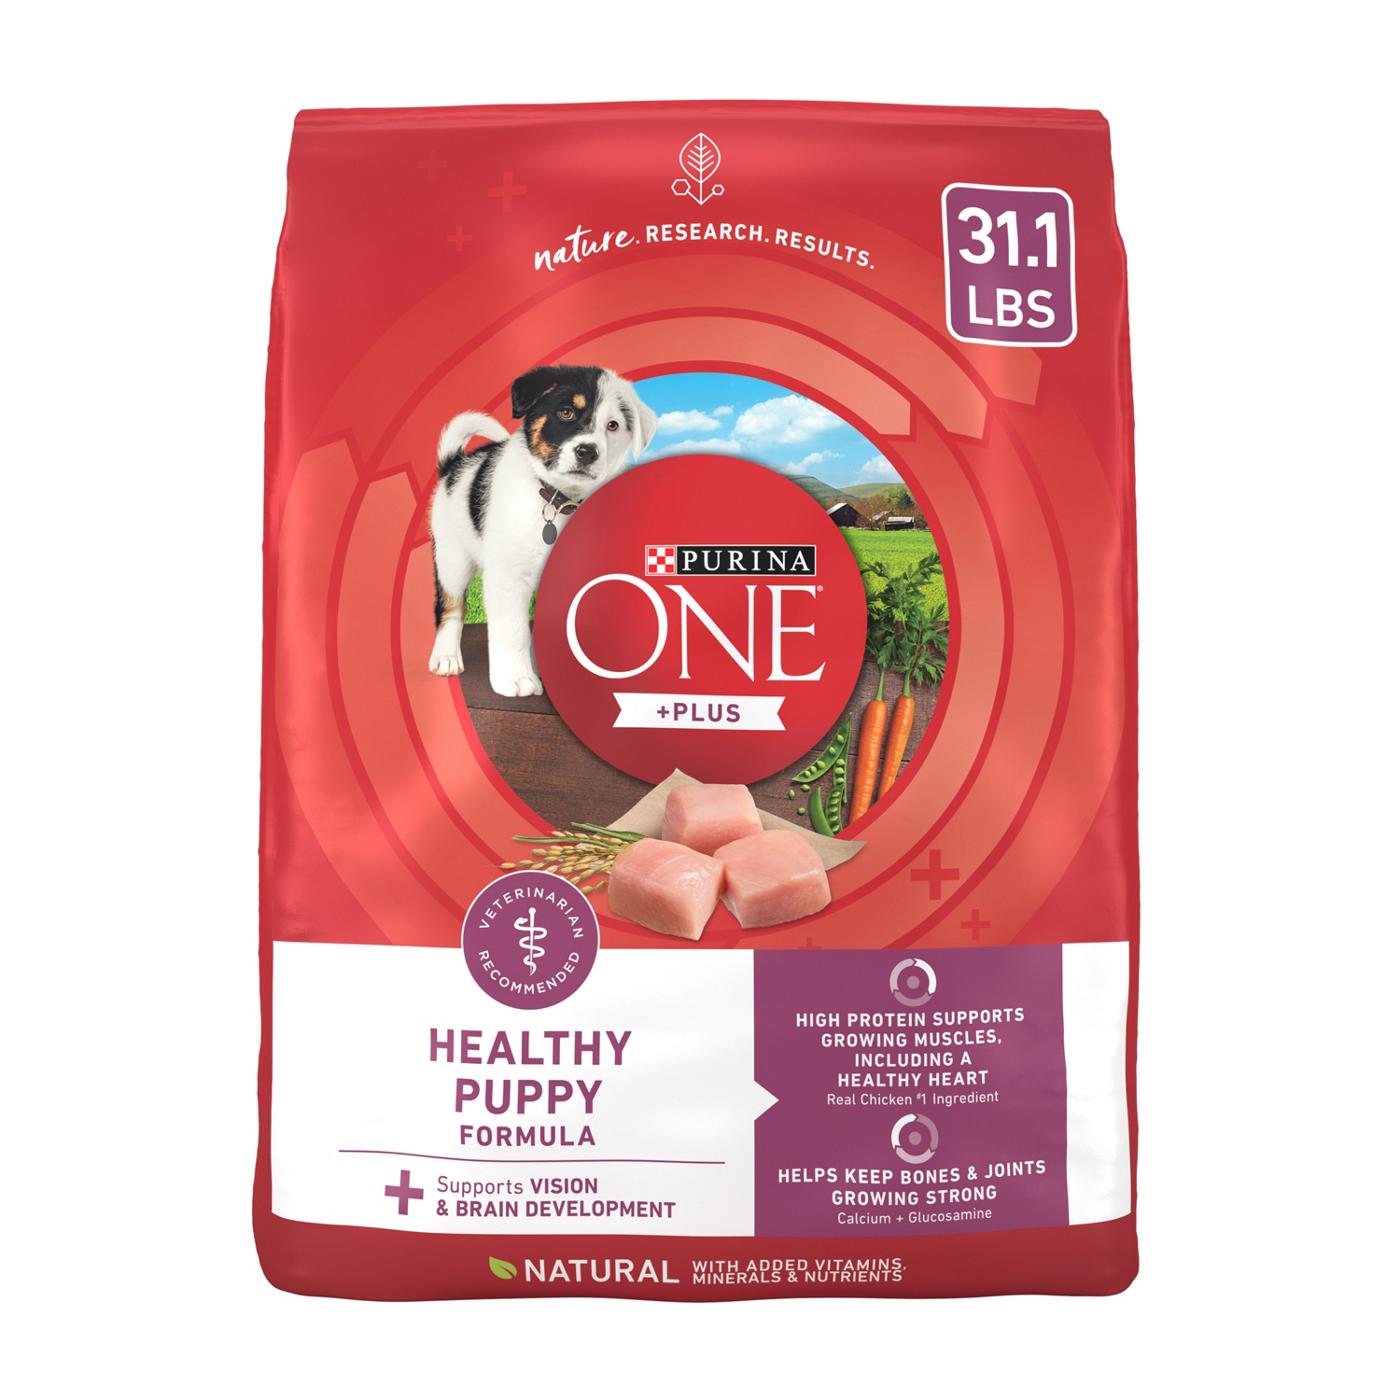 Purina ONE Purina ONE Plus Healthy Puppy Formula High Protein Natural Dry Puppy Food with added vitamins, minerals and nutrients; image 1 of 7